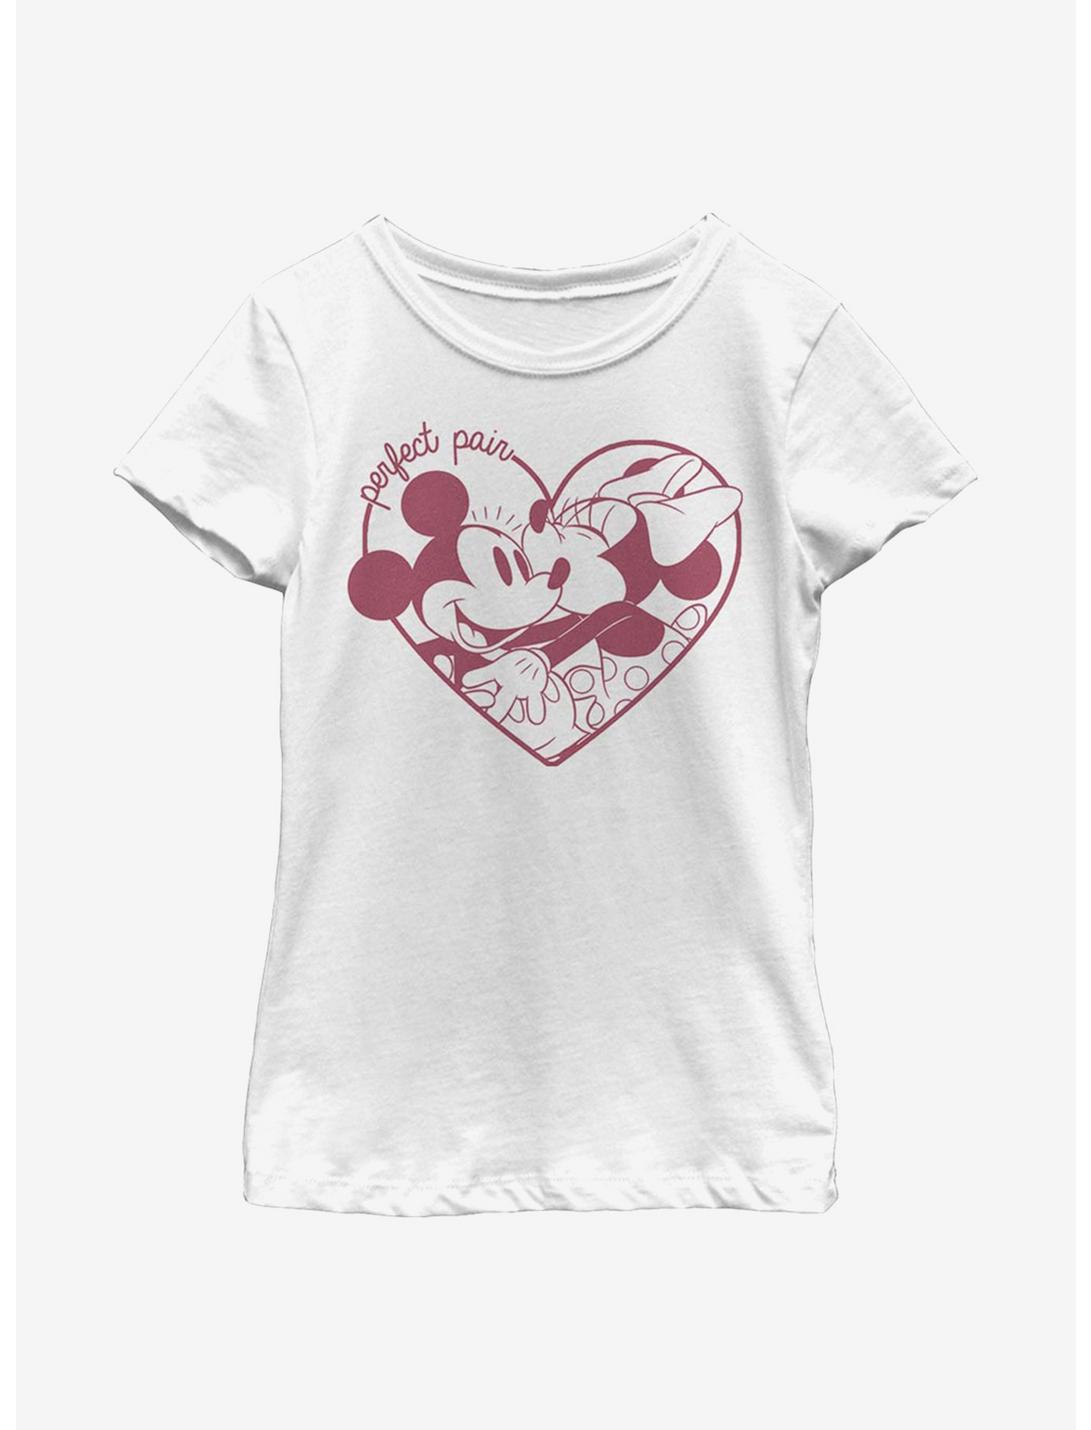 Disney Mickey Mouse Perfect Pair Youth Girls T-Shirt, WHITE, hi-res